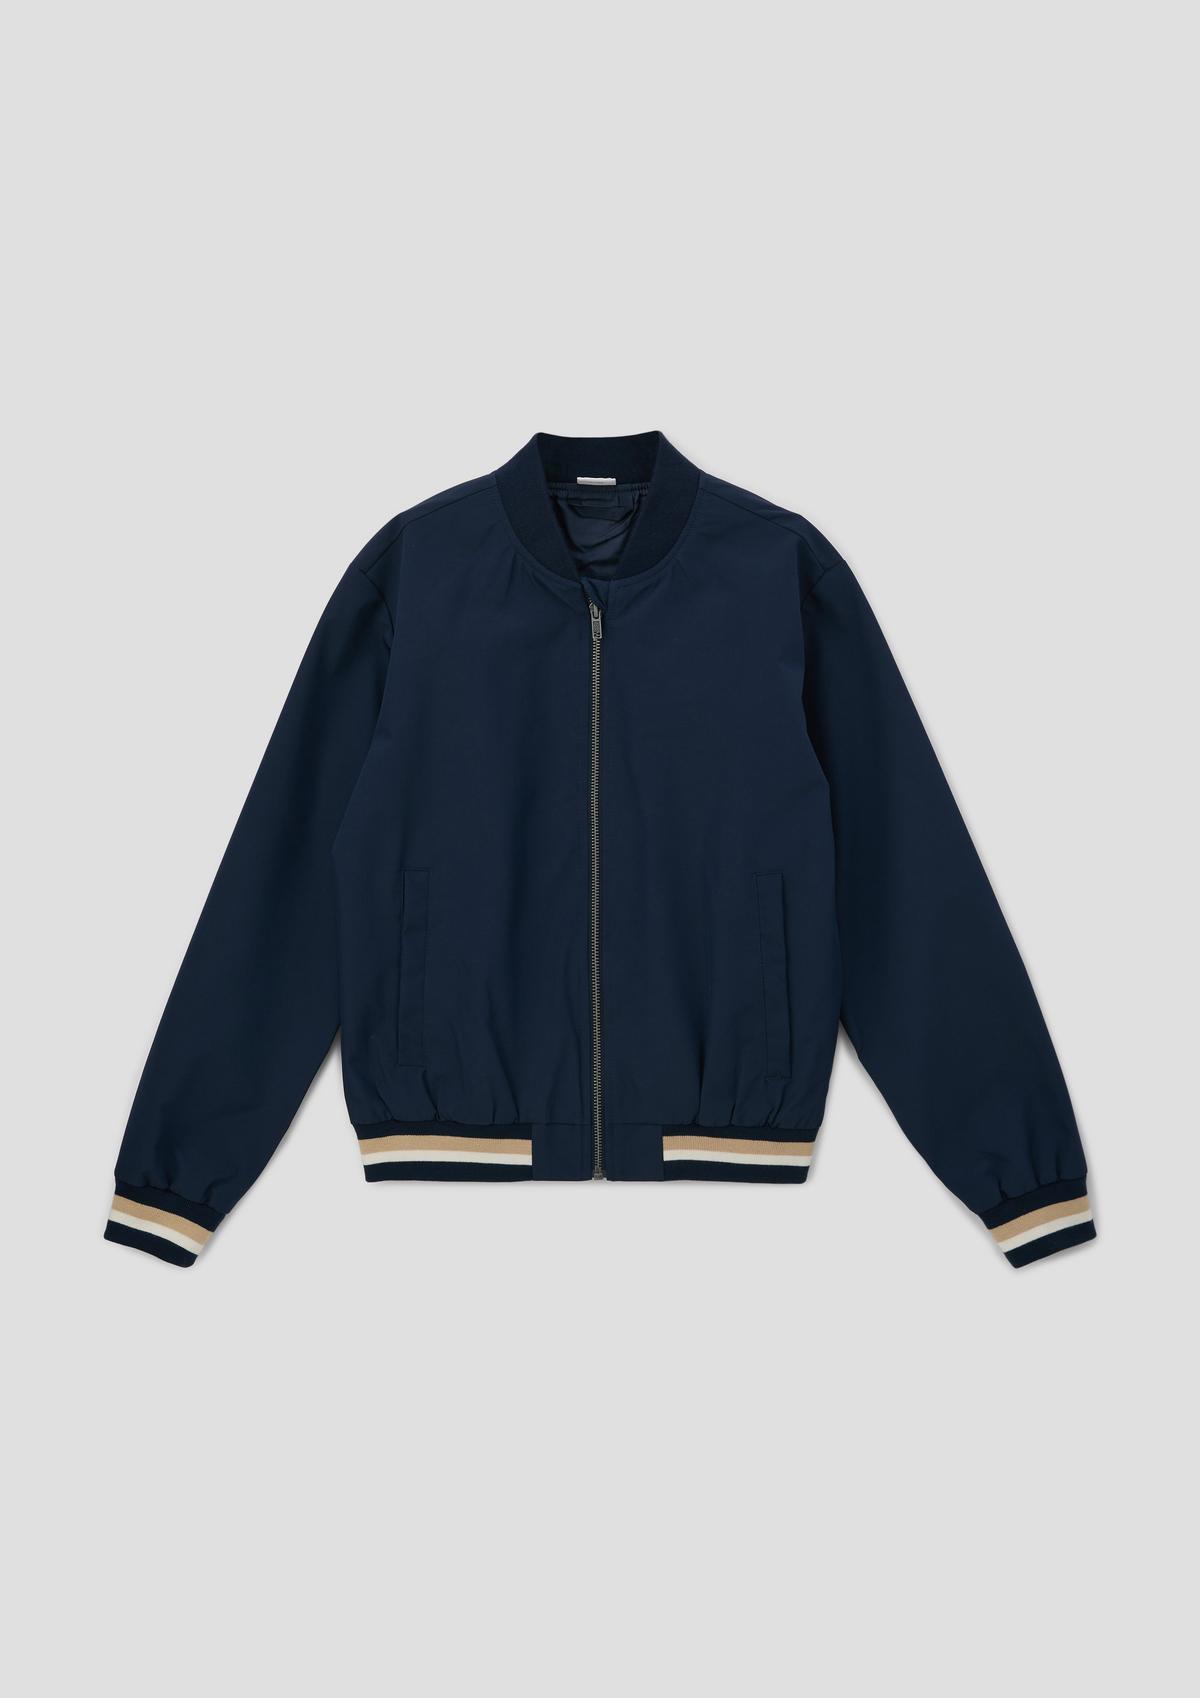 s.Oliver Bomber jacket with striped details and lightweight lining